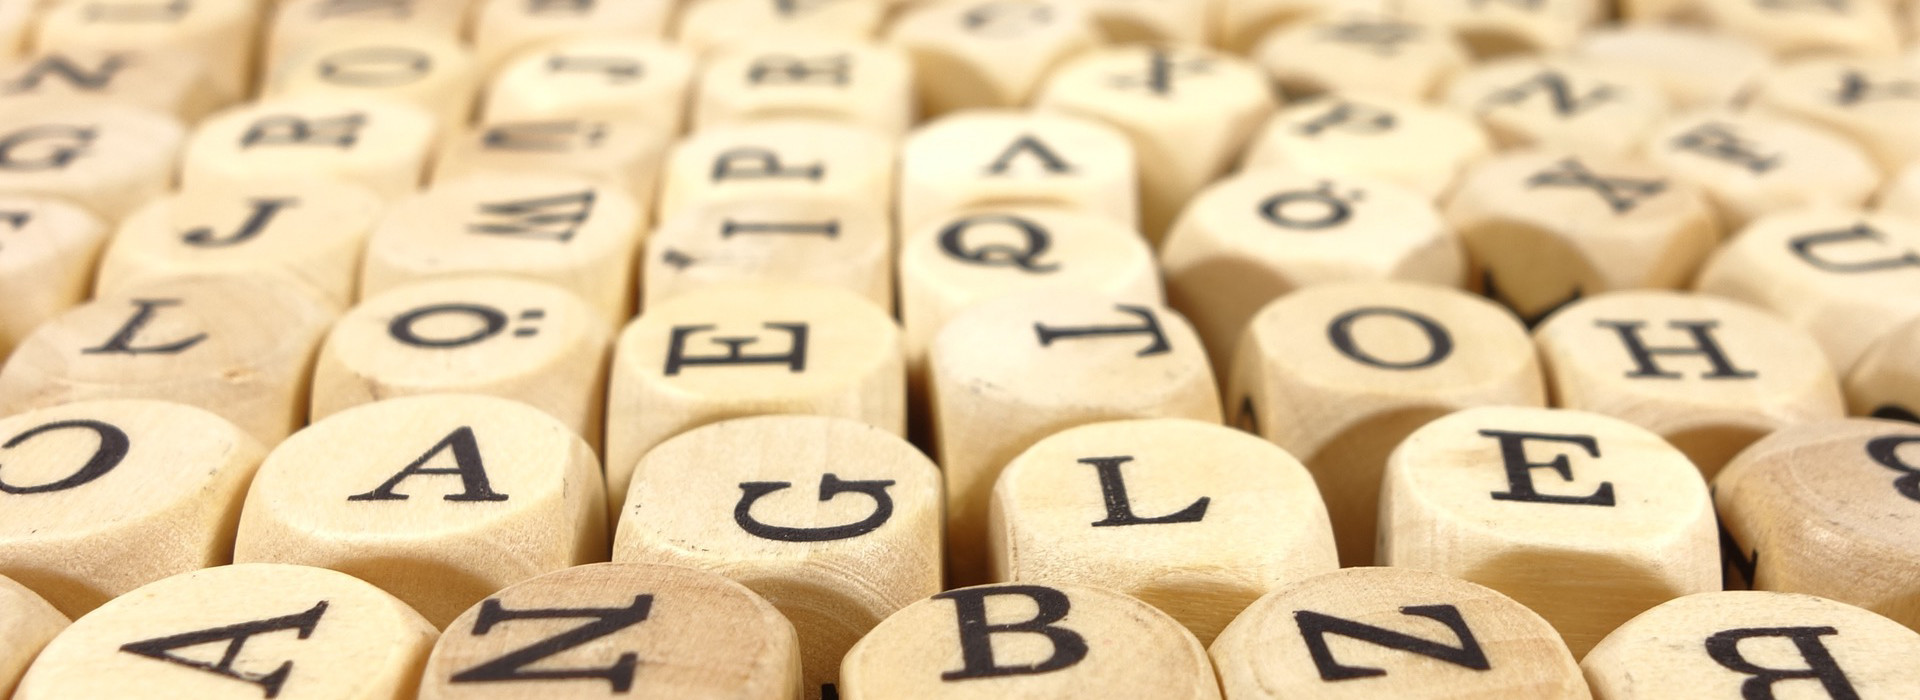 5 Reasons English Spelling Is a Mess